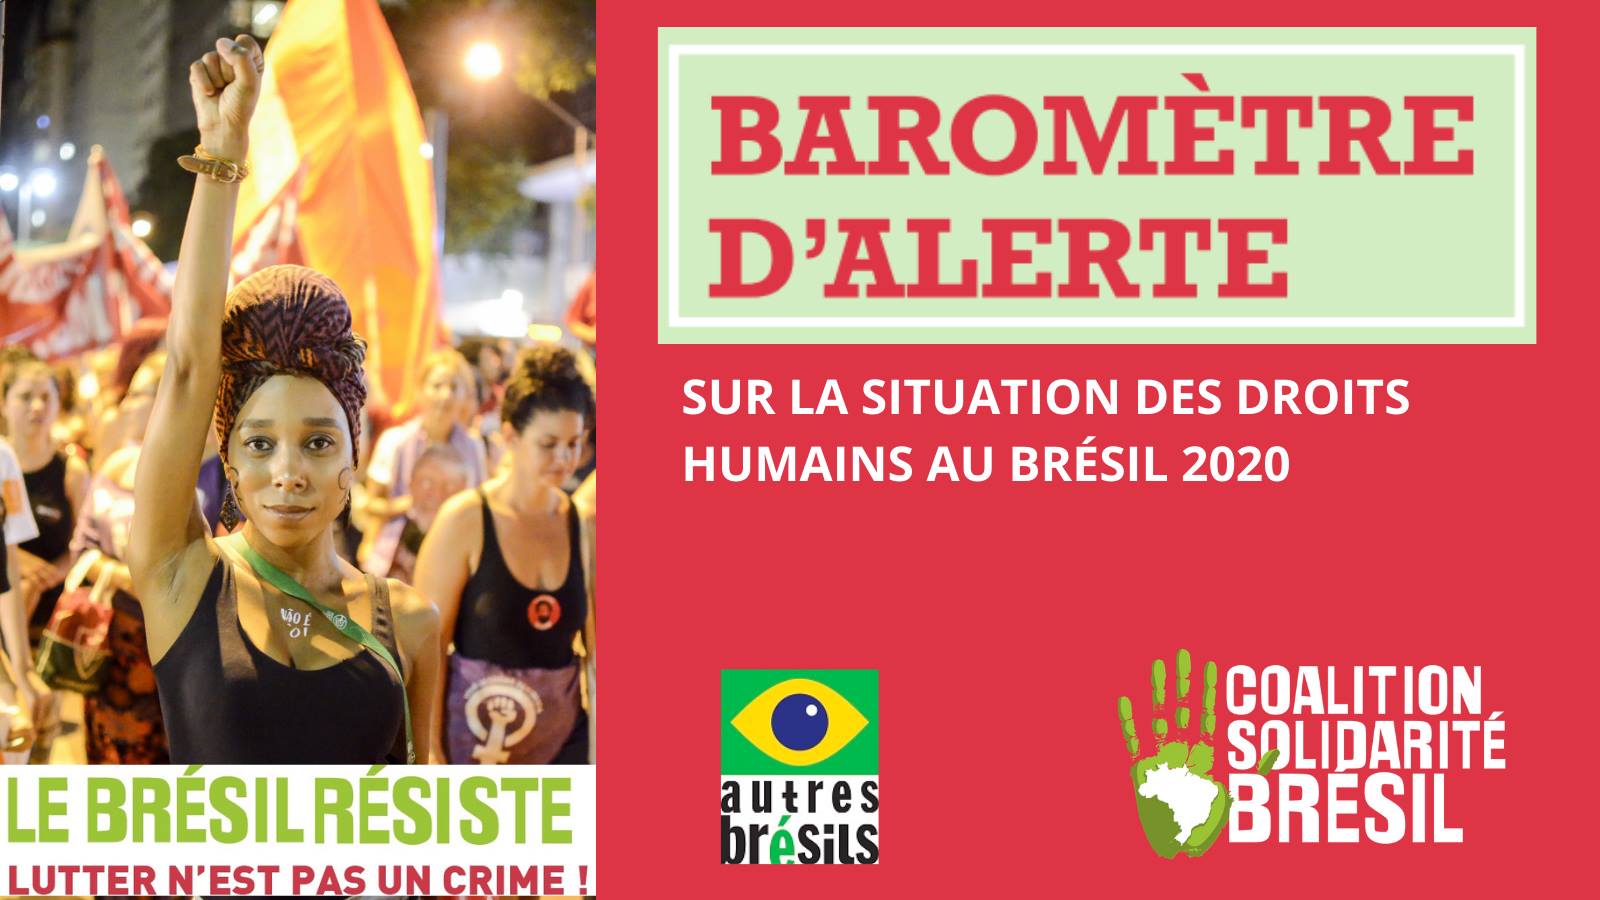 2nd Warning Barometer on the situation of human rights in Brazil: the struggle for democracy in Brazil must continue!